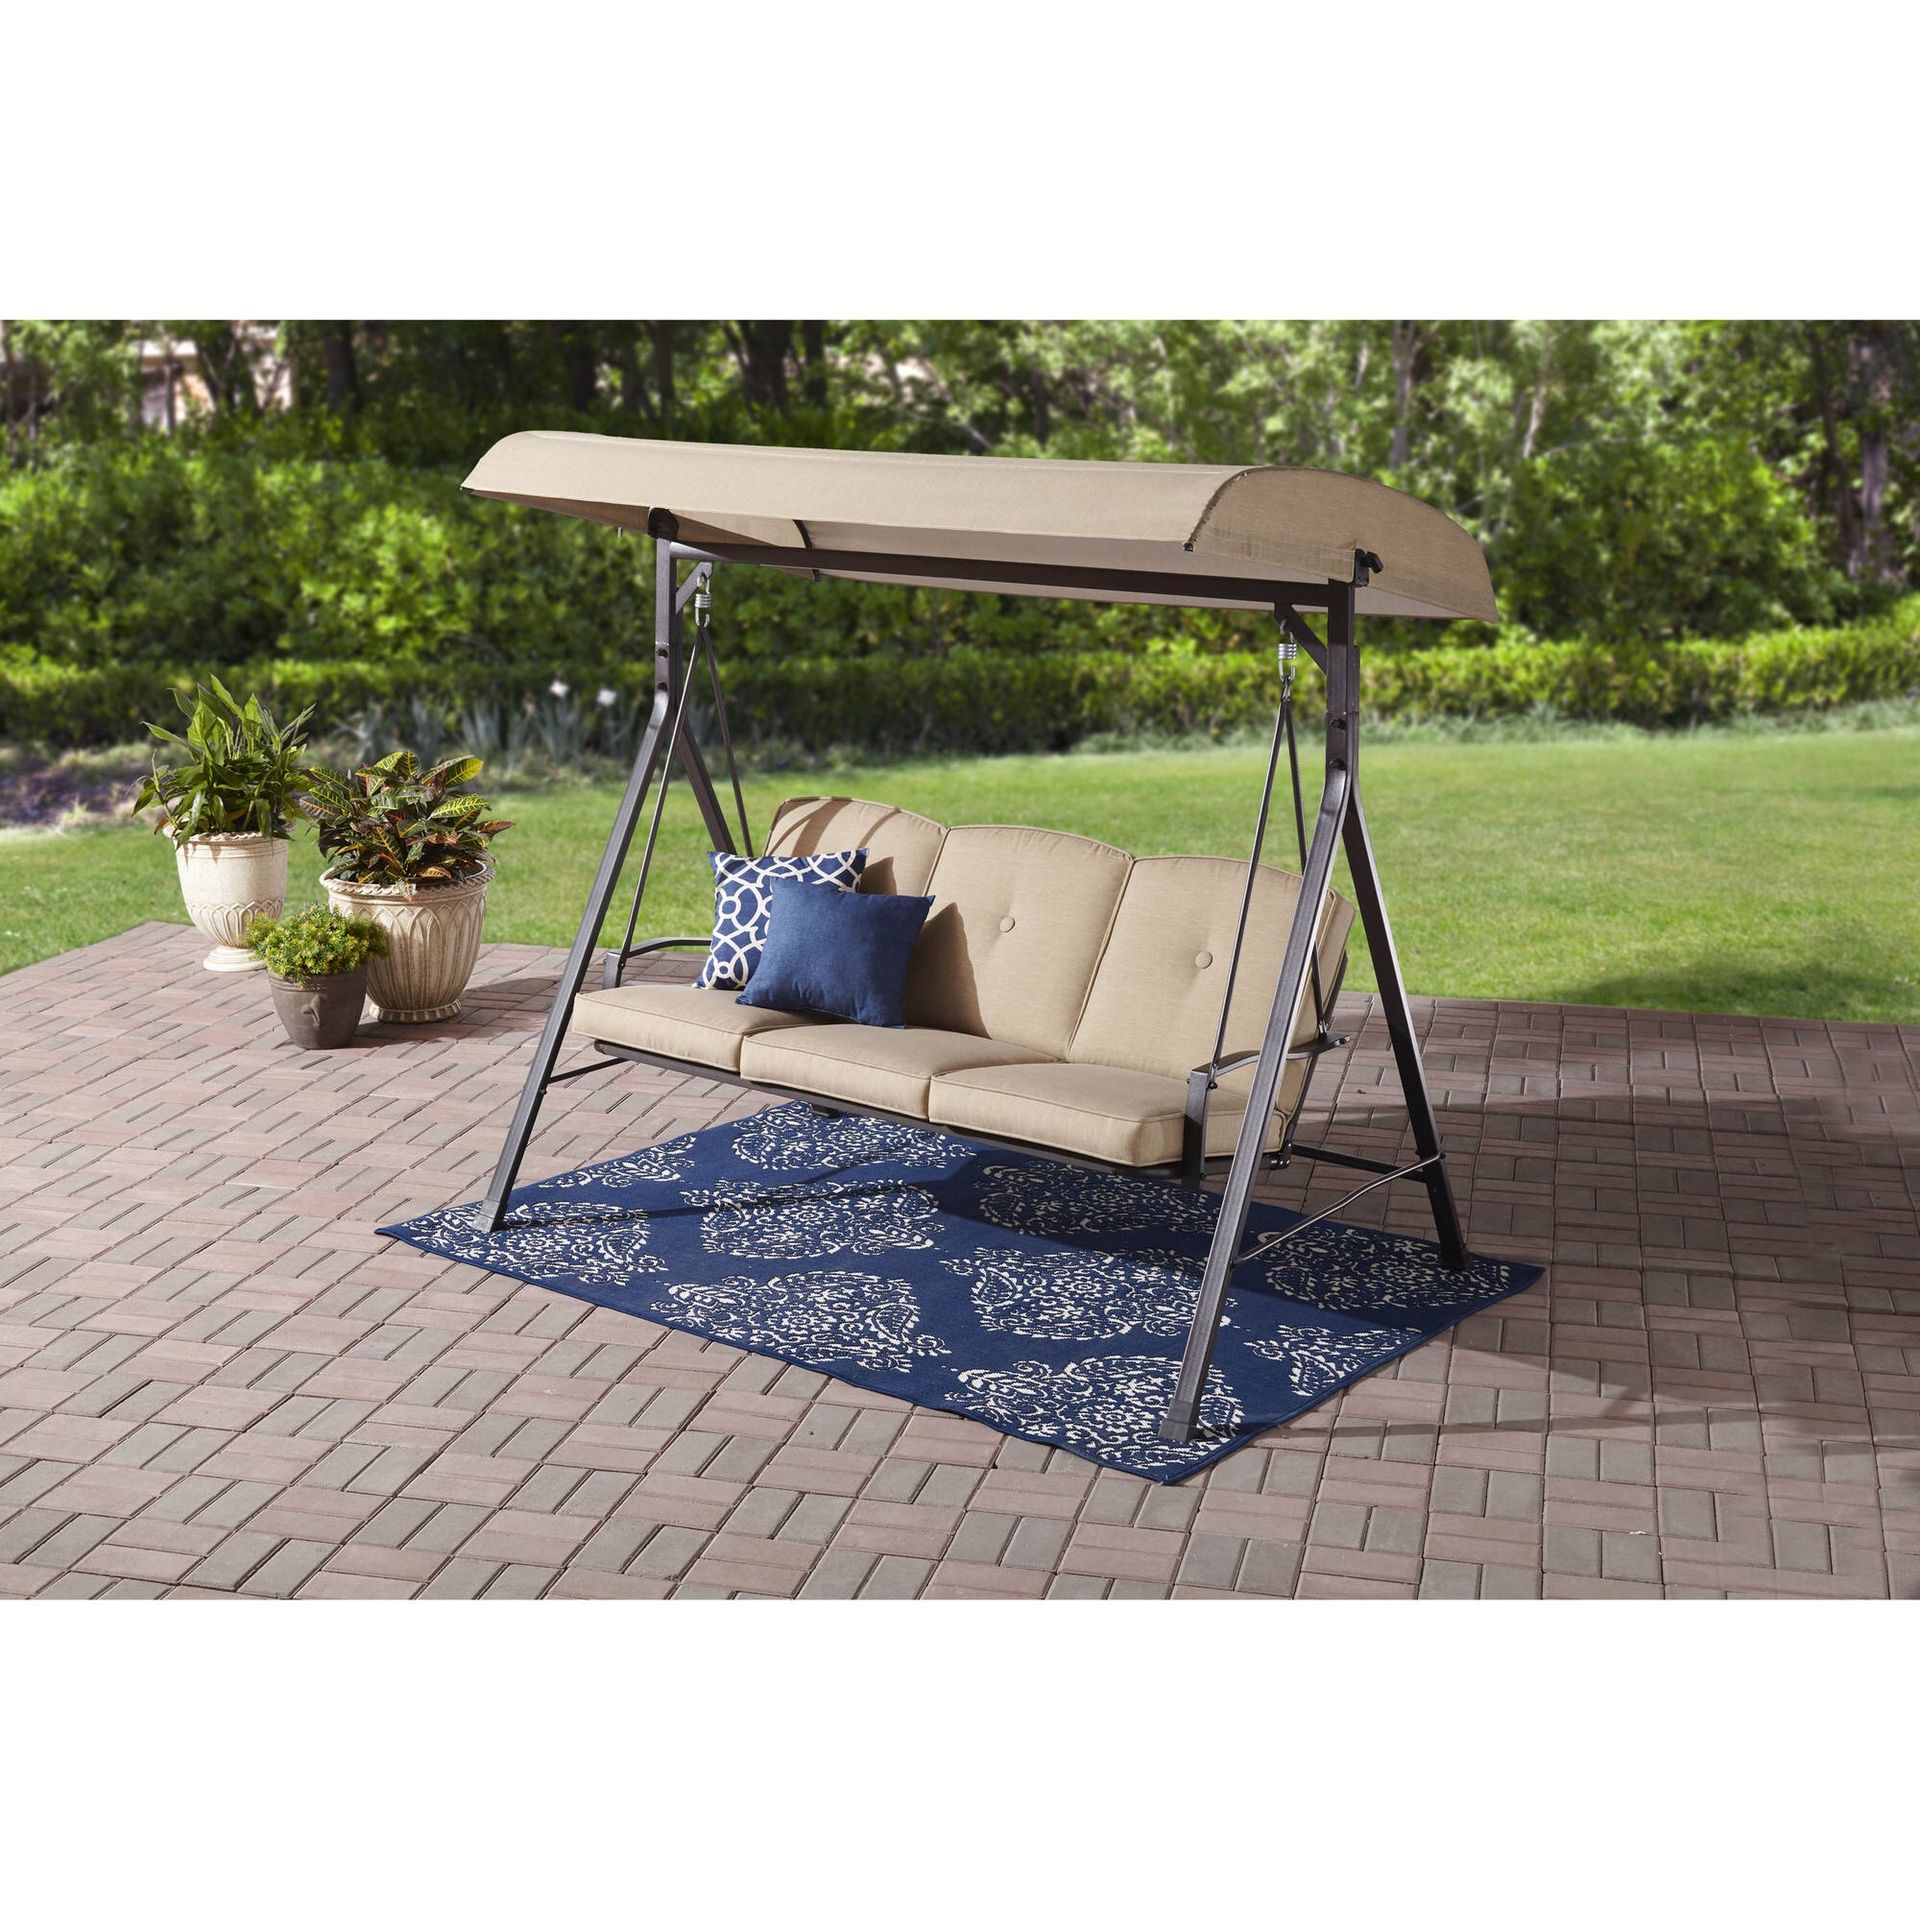 Forest Hills 3-Seat Cushion Canopy Porch Swing